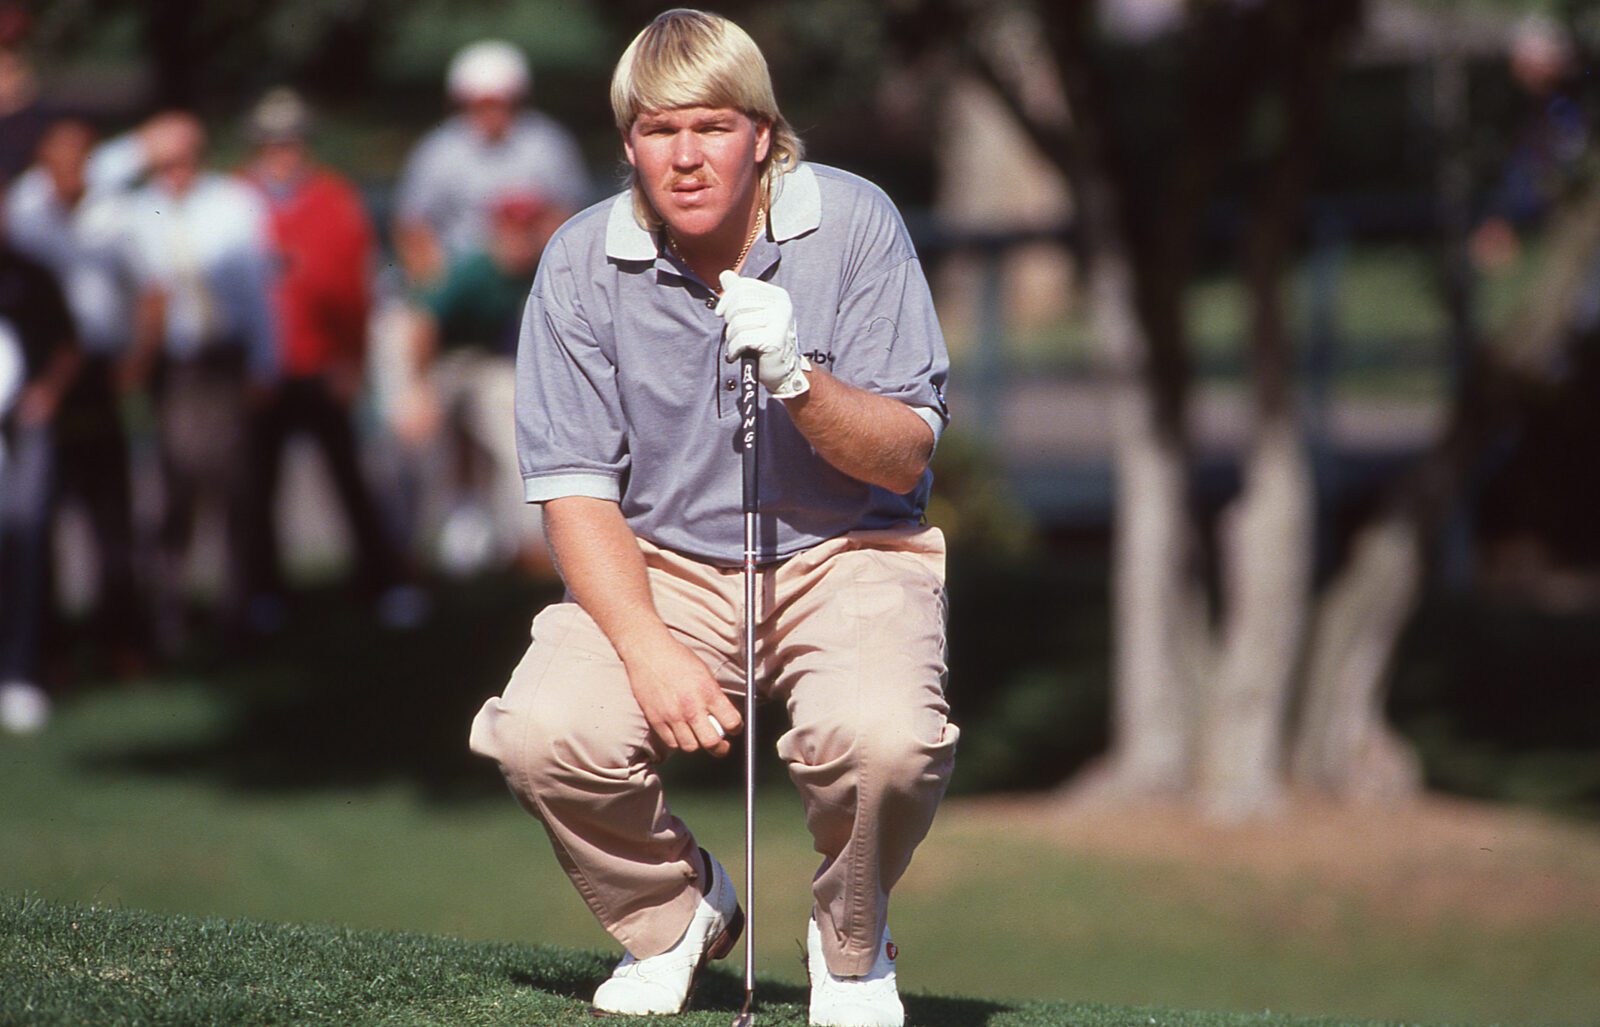 Promising Golf Careers That Ended Prematurely